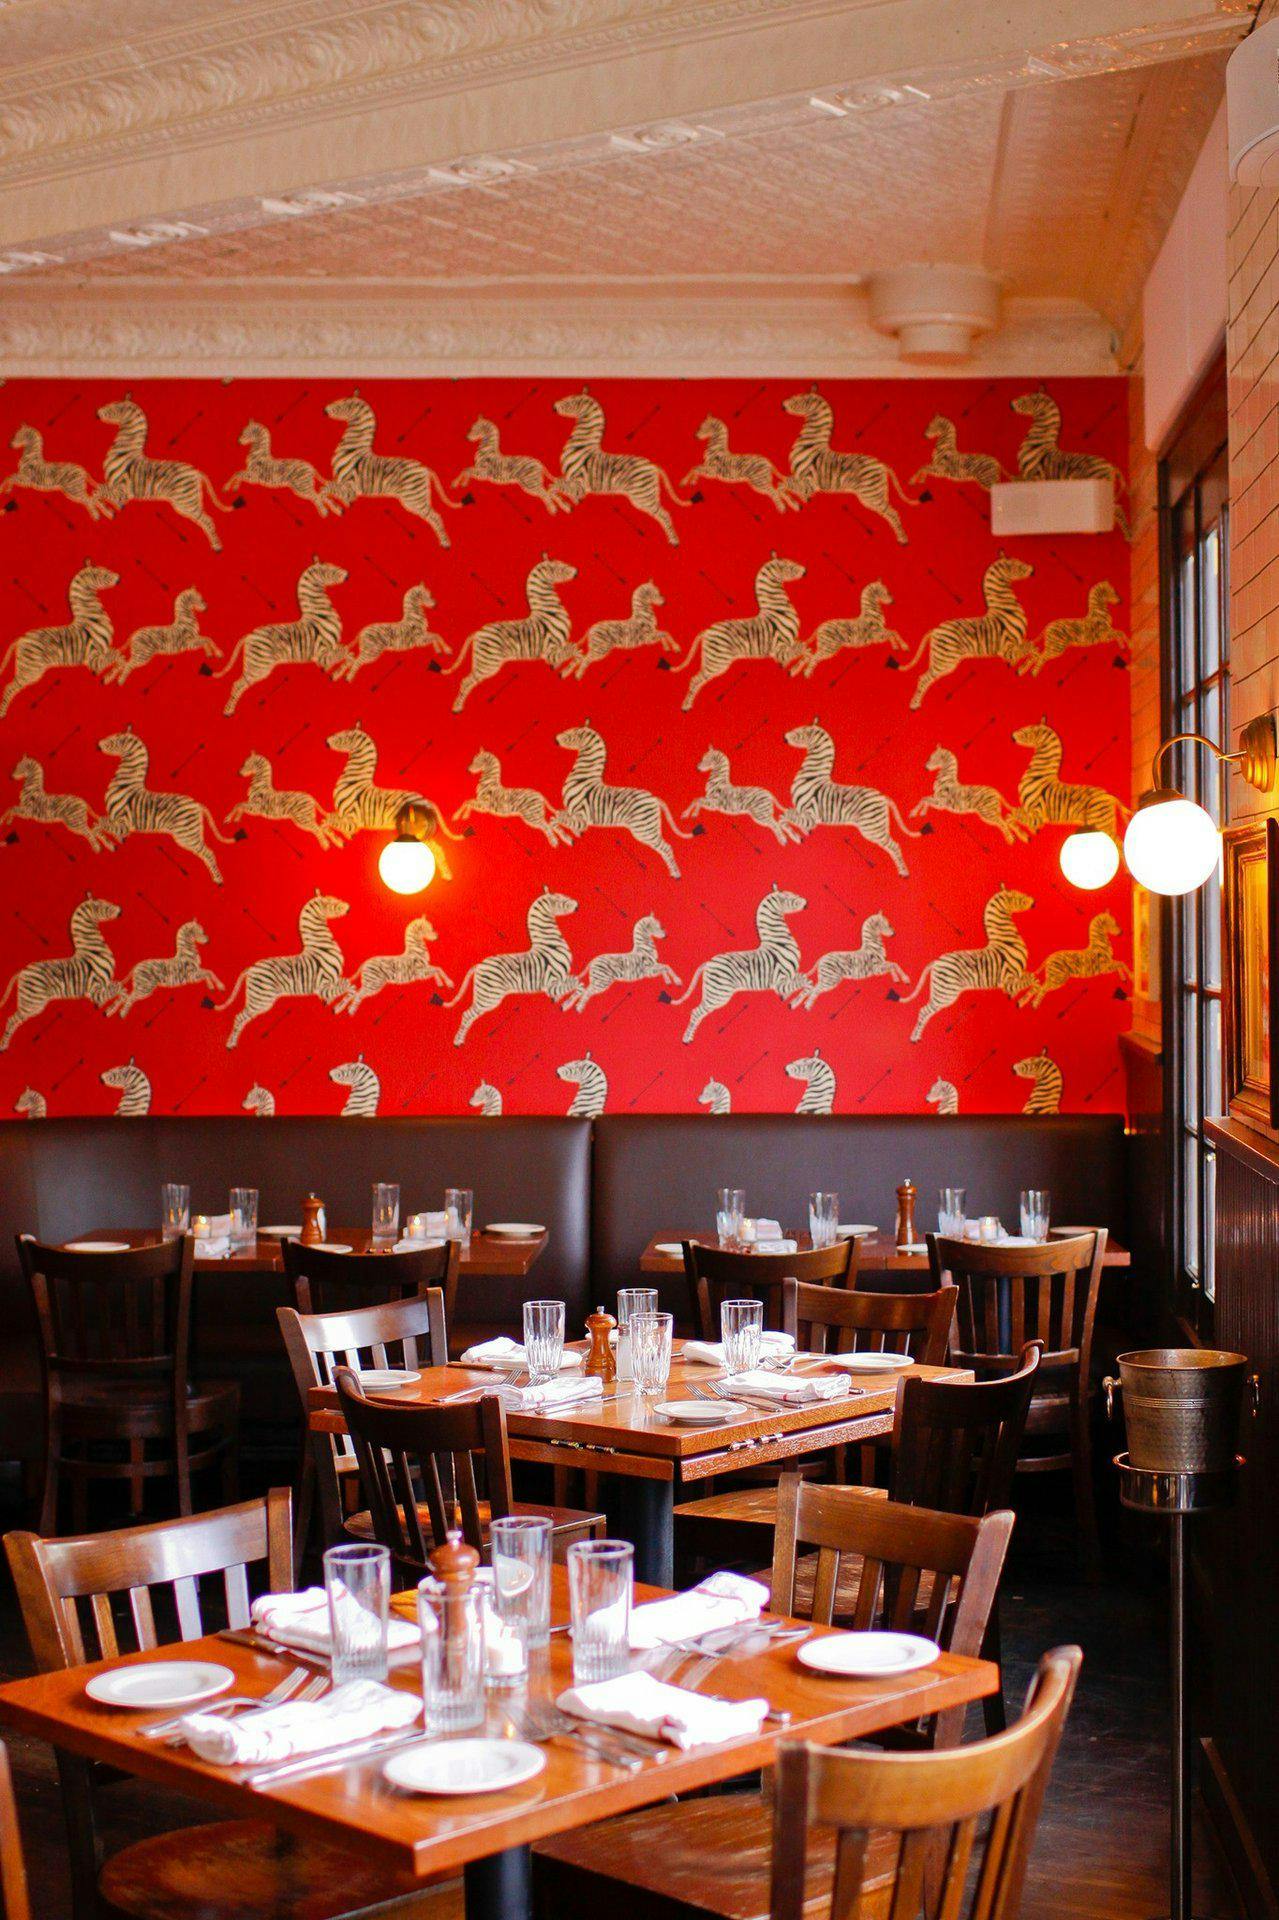 Interior shot of Almond Restaurant in Bridgehampton, NY with red wall